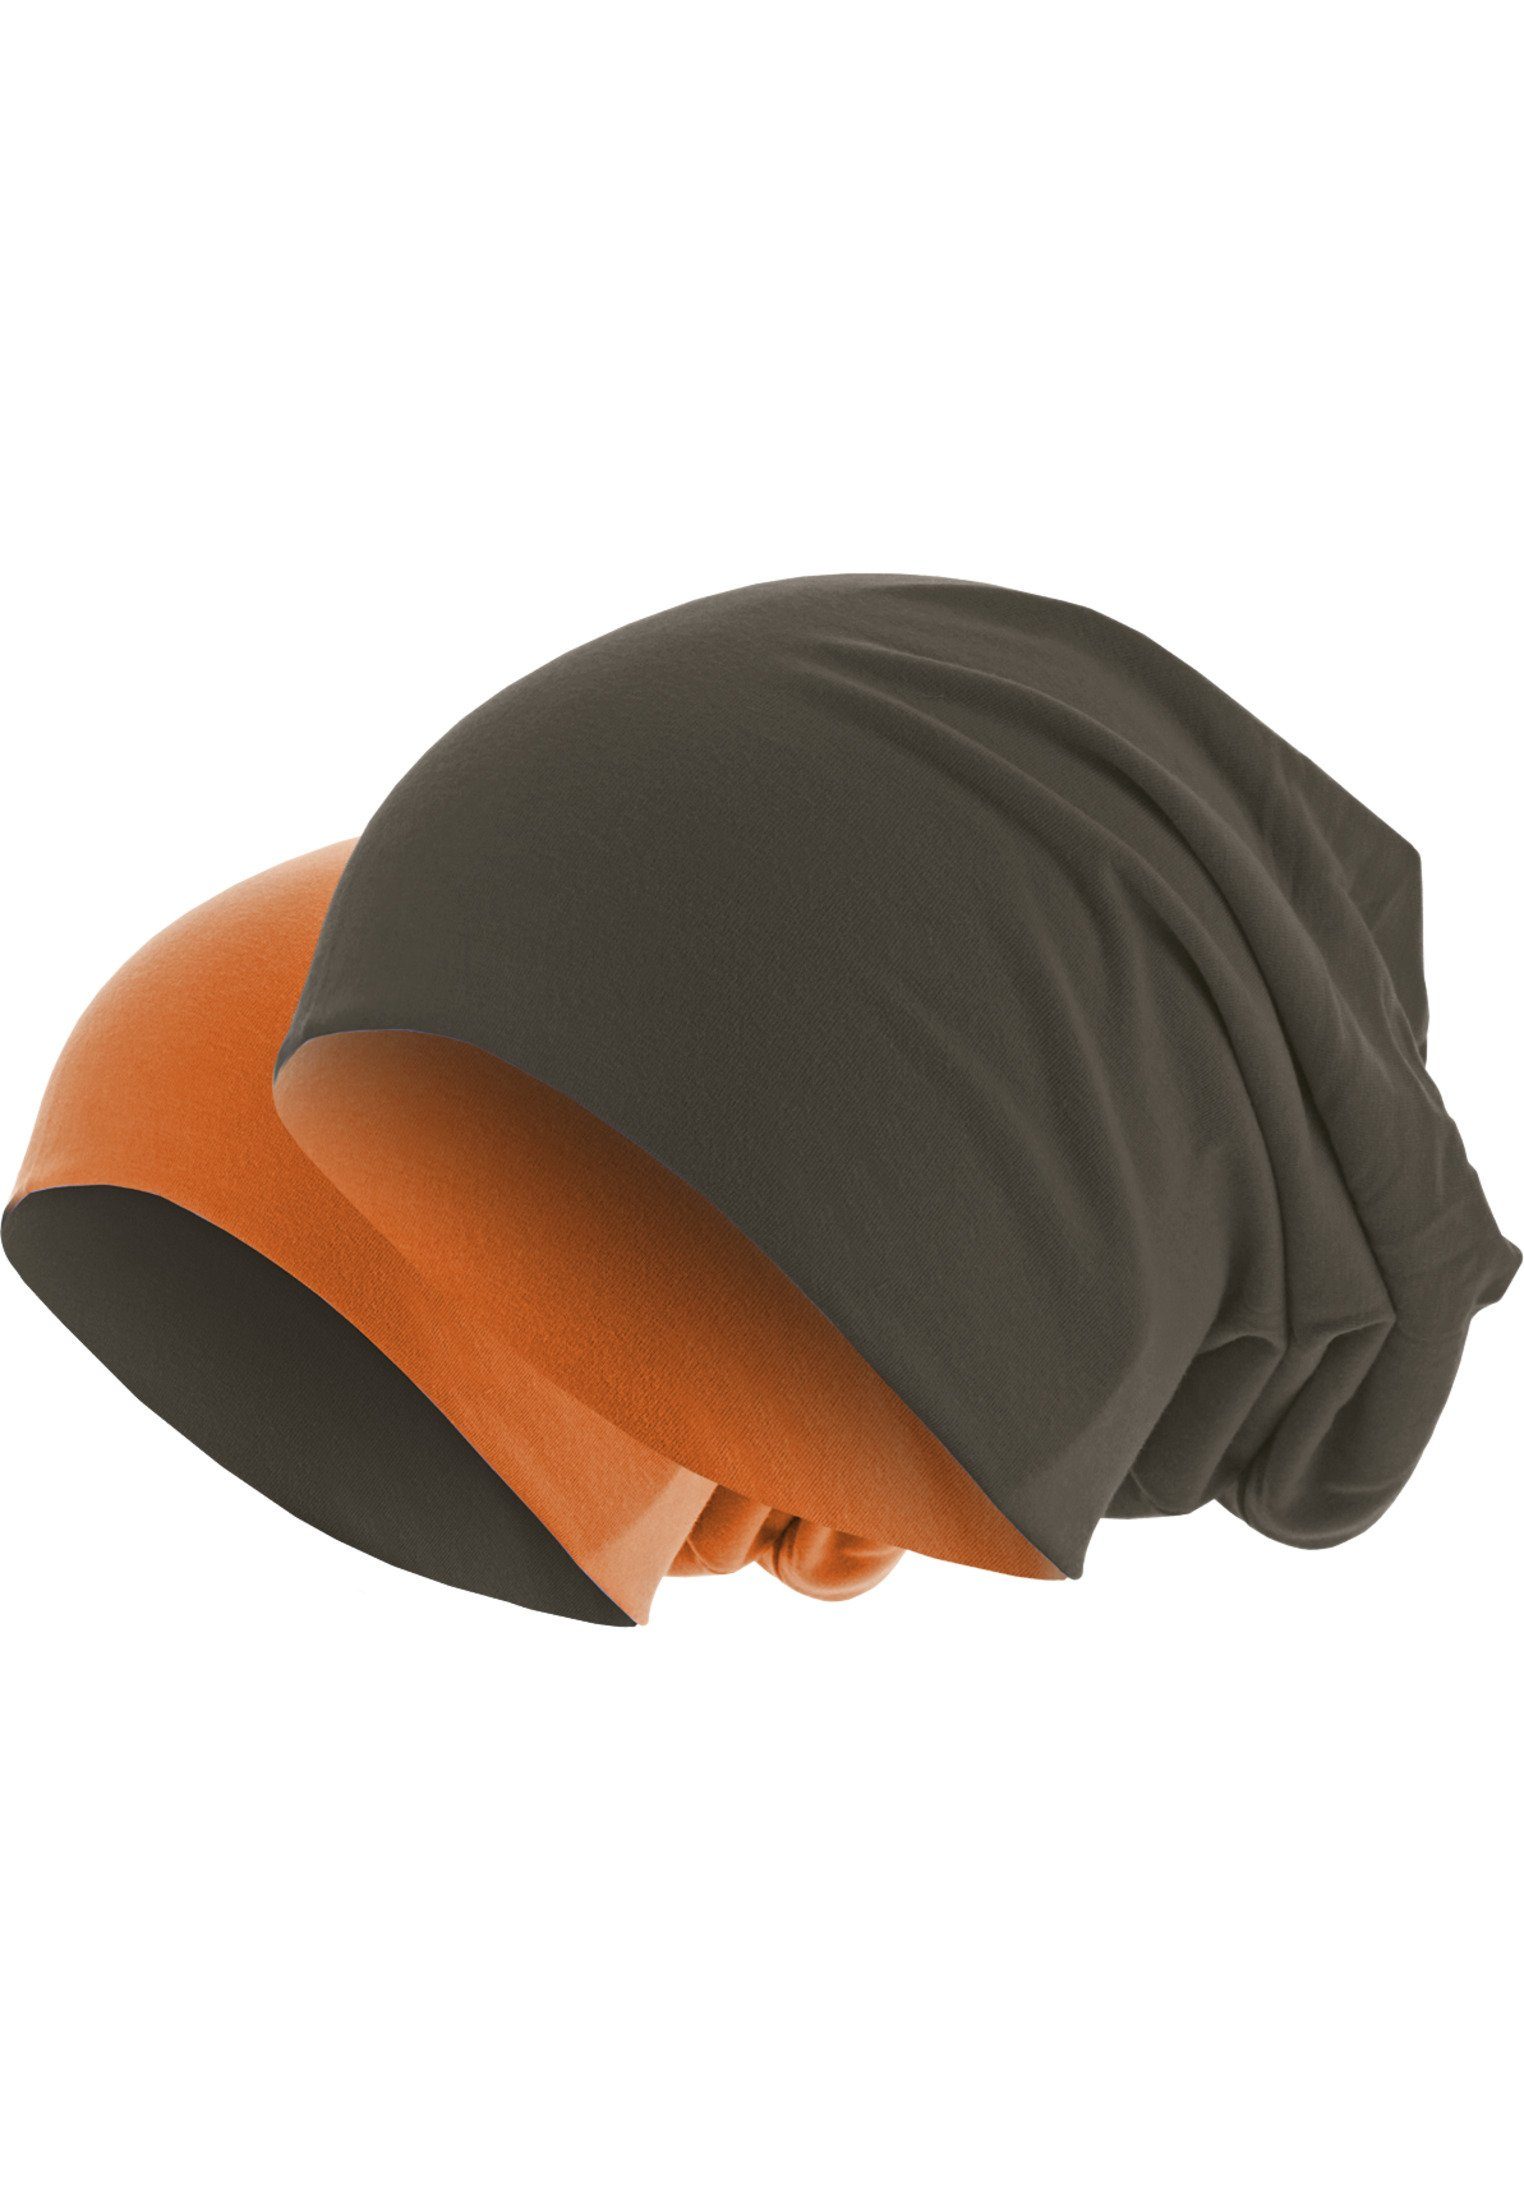 MSTRDS Beanie (1-St) Accessoires chocolate/orange reversible Beanie Jersey